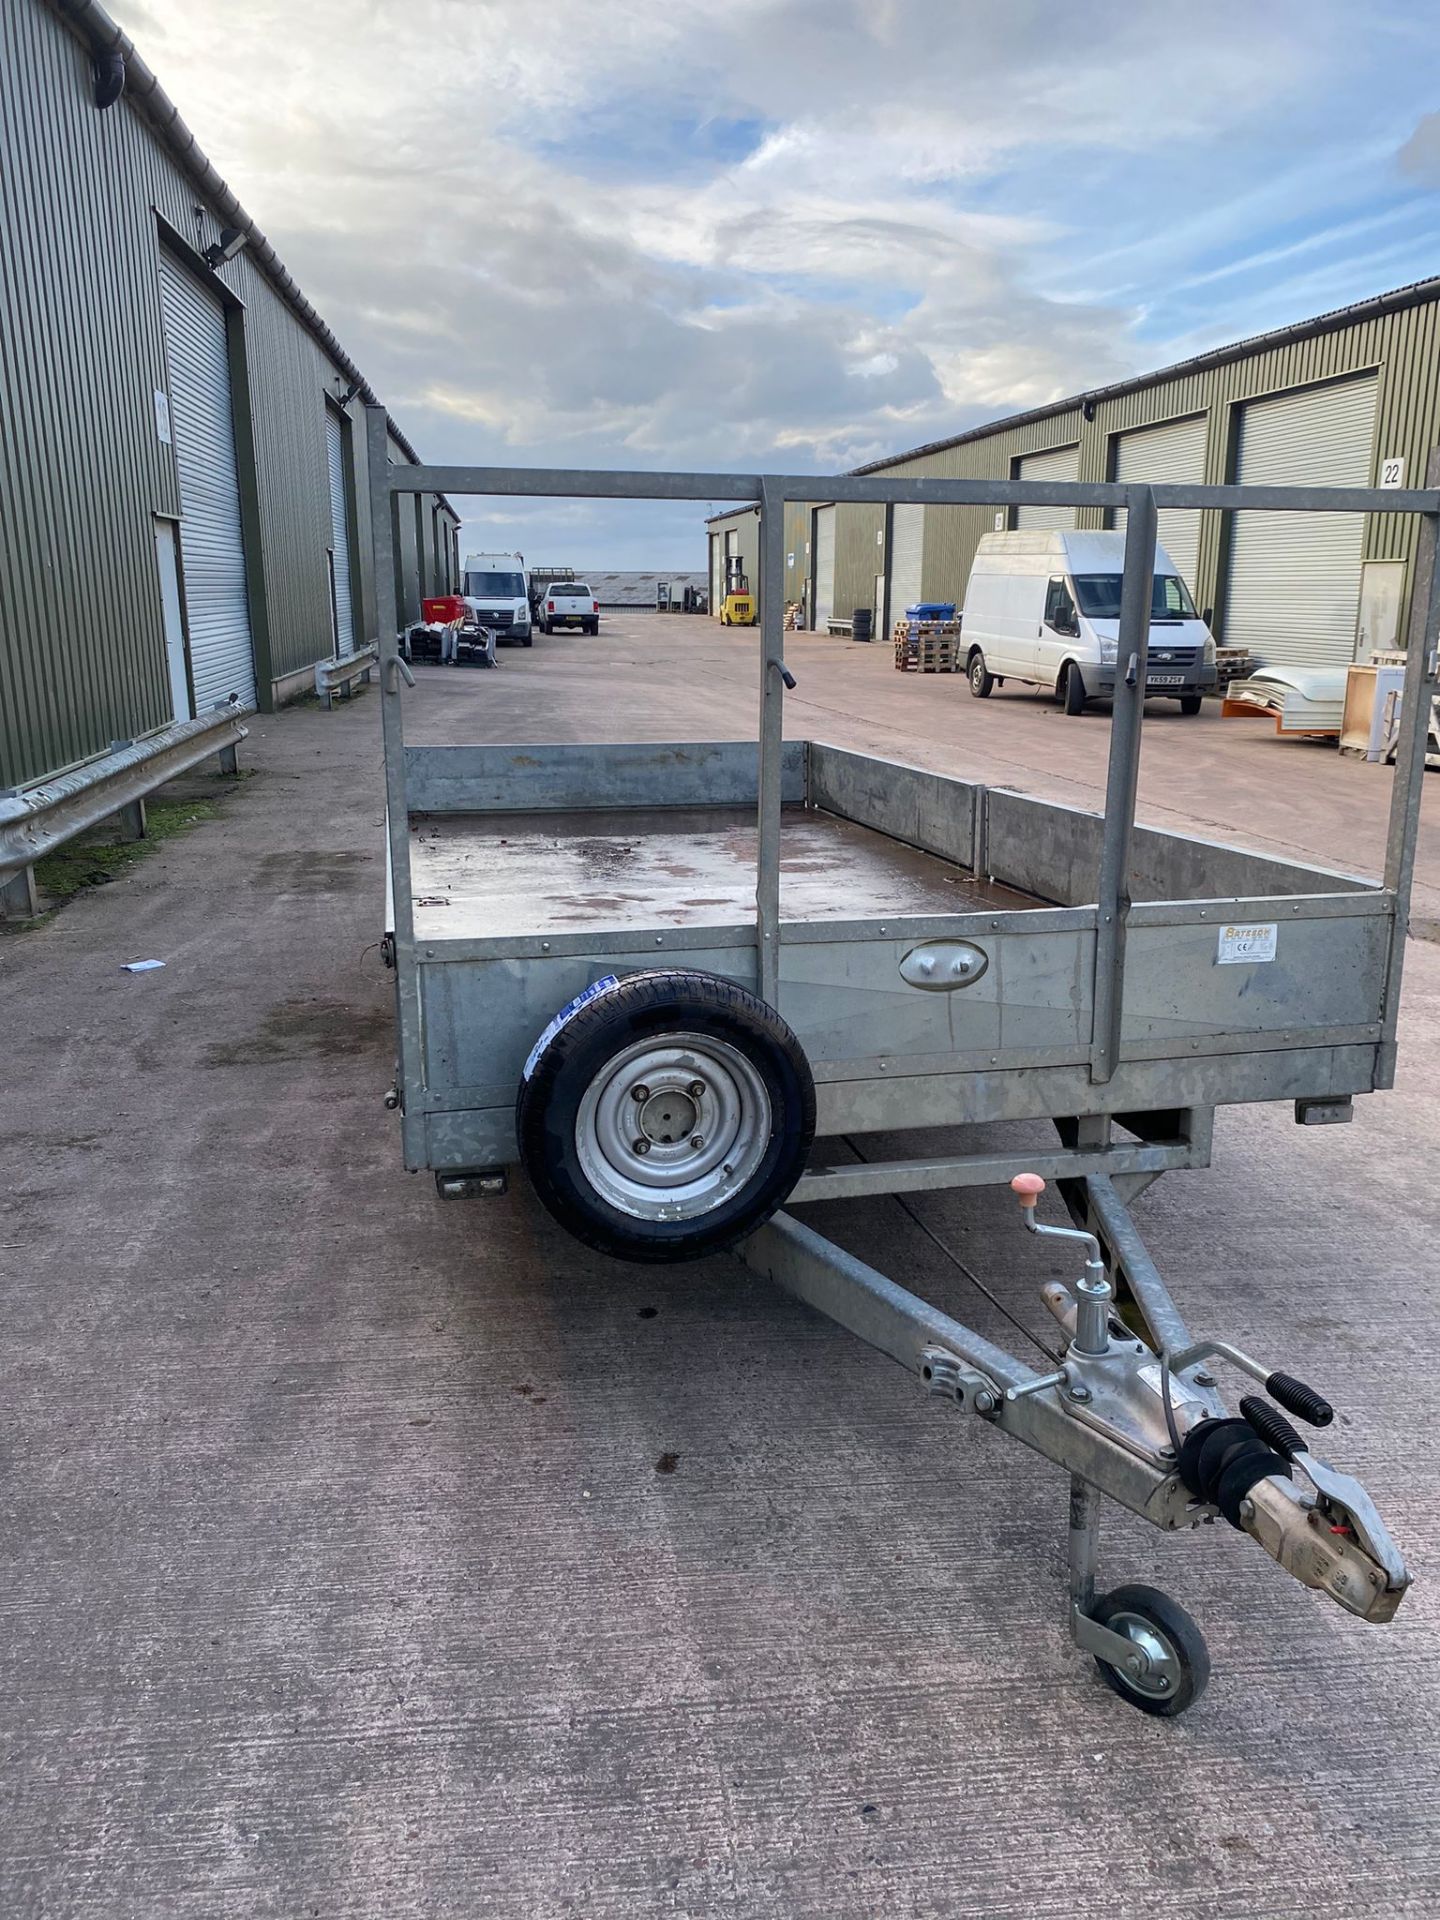 2007 BATESON TRAILER - IN VERY GOOD CONDITION WITH RAMPS, BRAKES ALL WORK, LIGHTS ALL WORK - Image 2 of 11